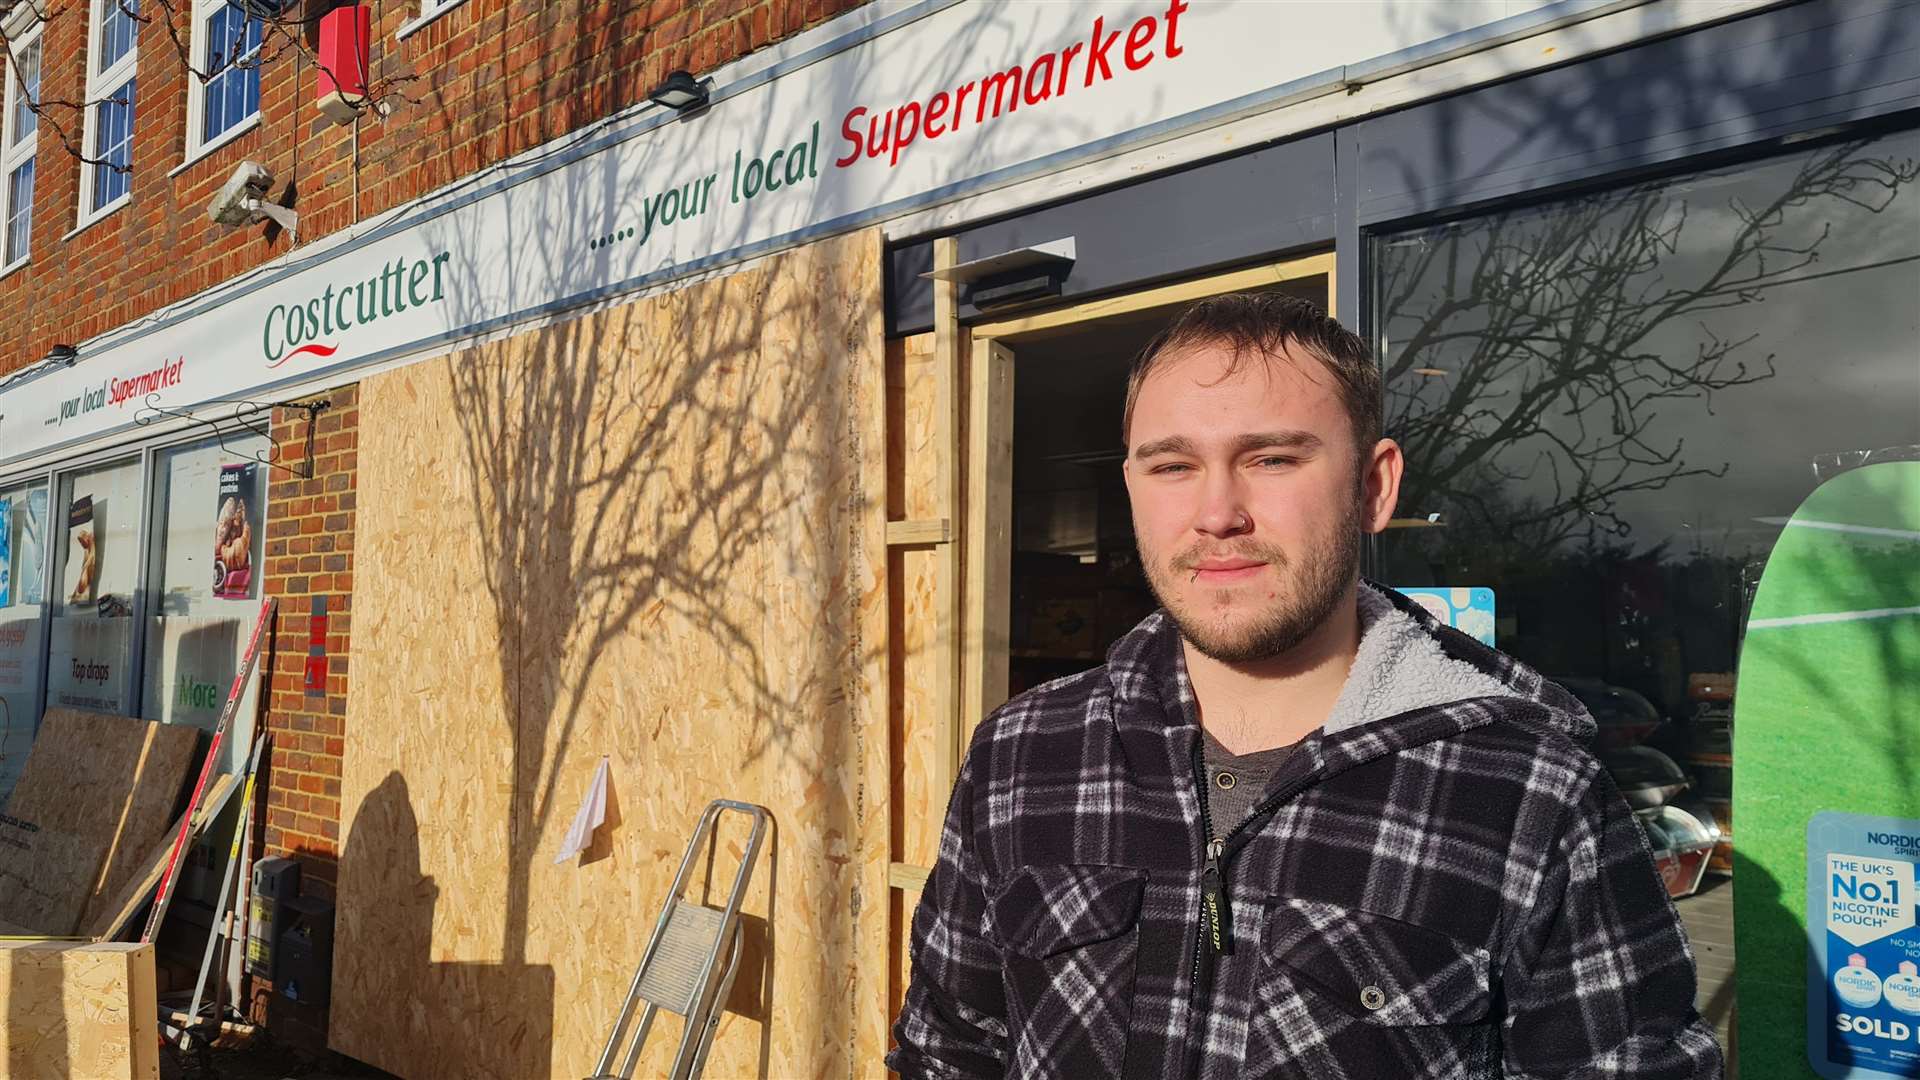 Shop assistant Kieran Rutter has thanked customers for their support following the ram-raid at Costcutter in Blean